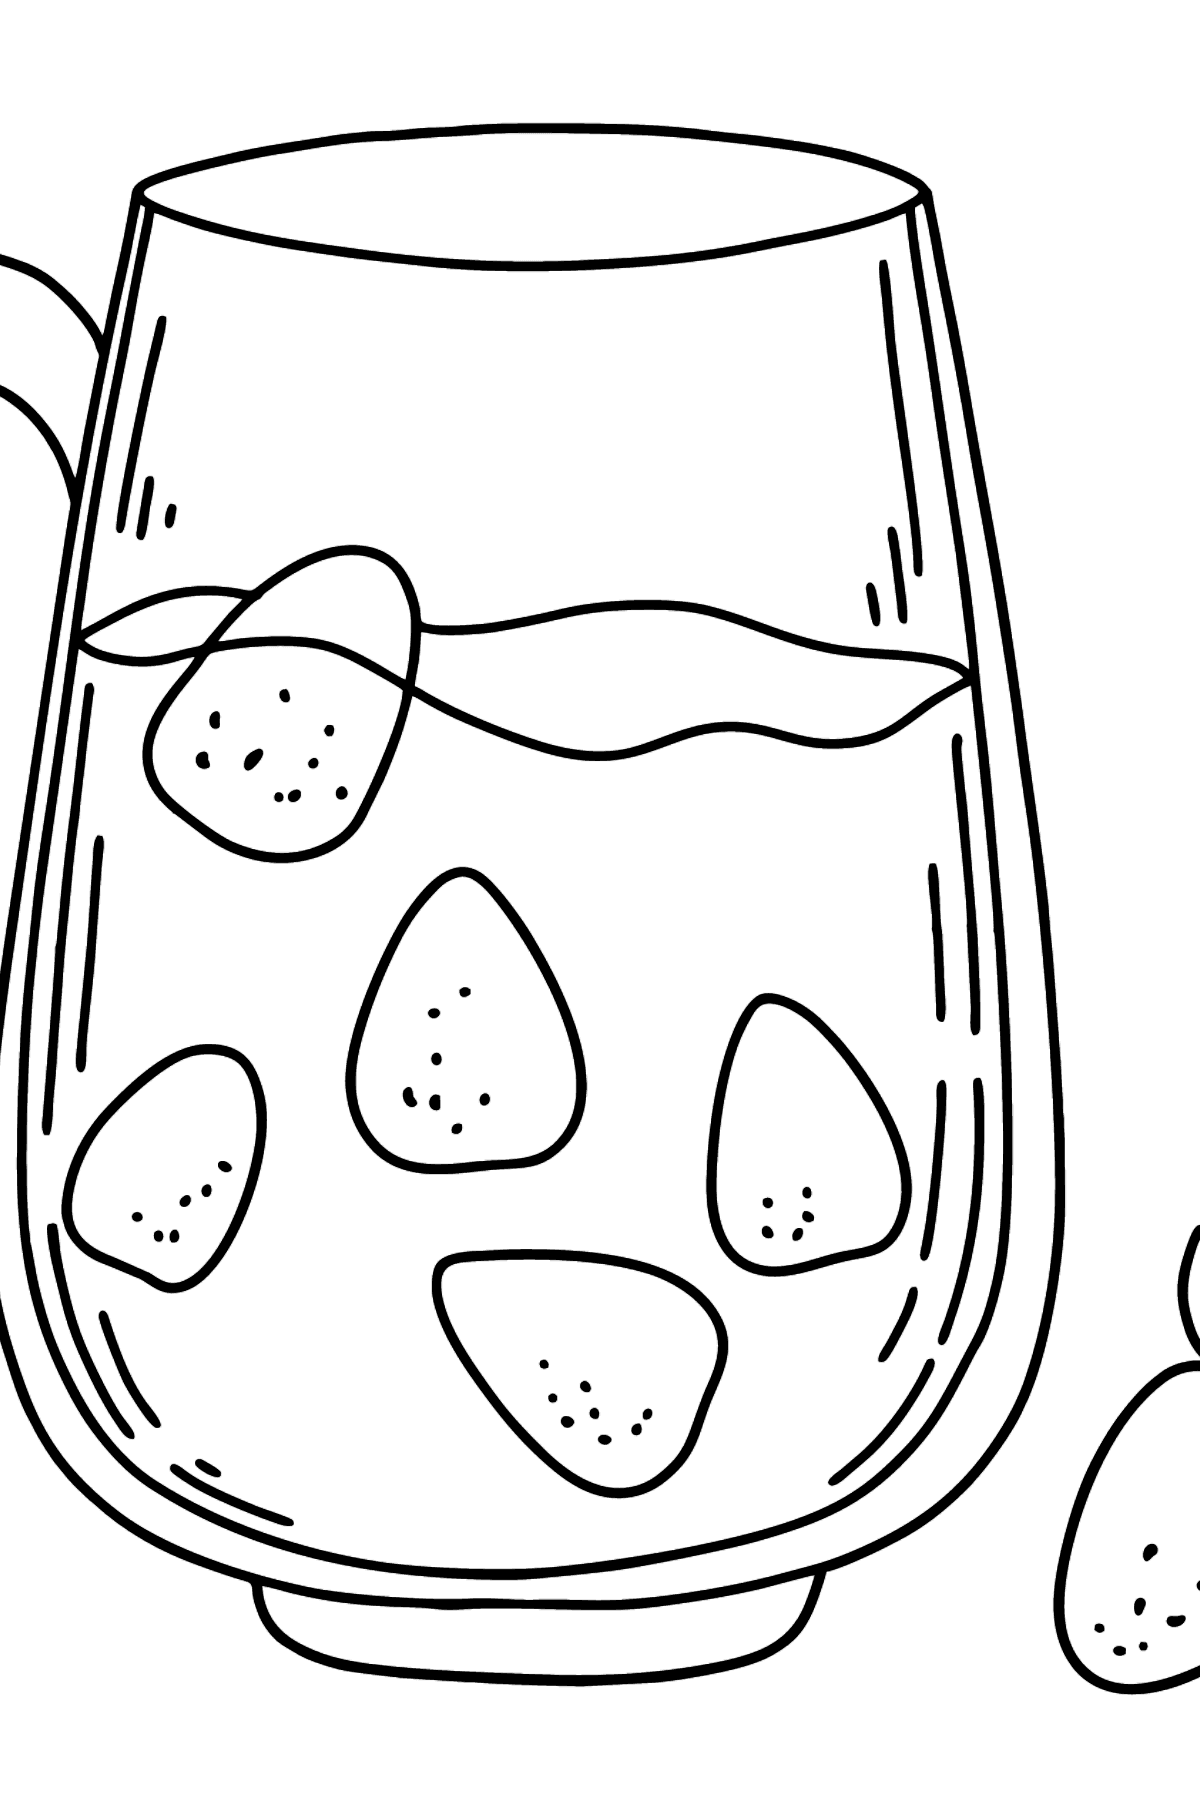 Milk with Berries coloring page - Coloring Pages for Kids